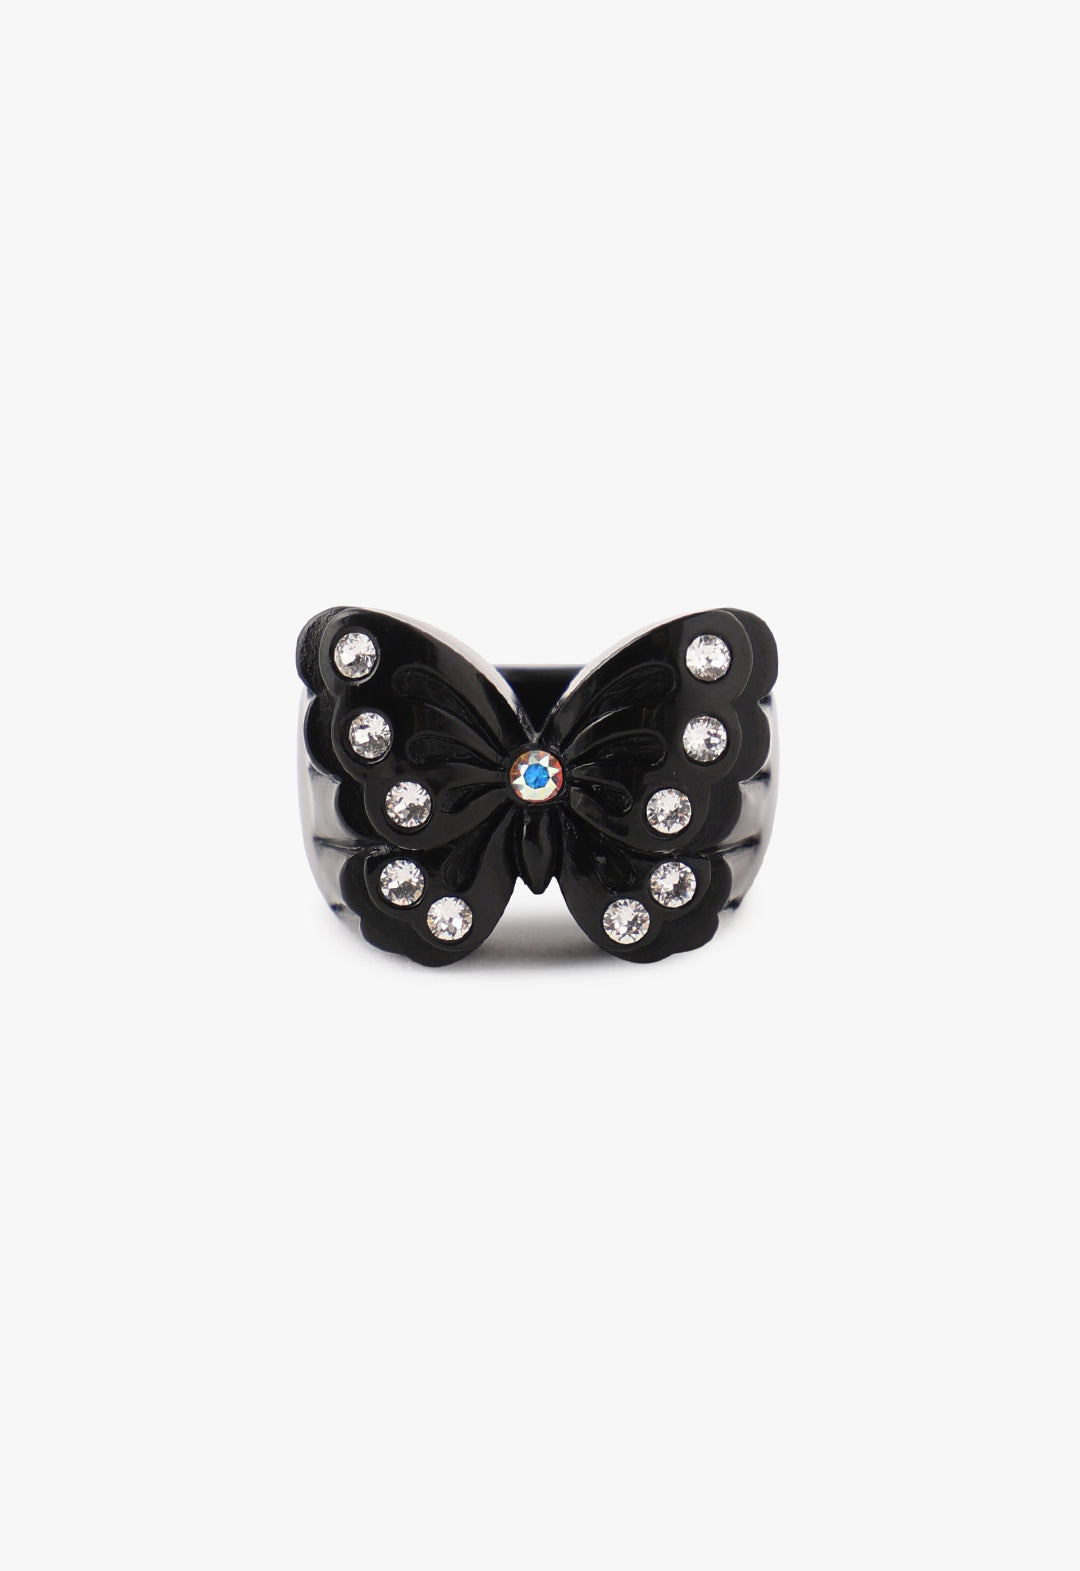 Butterfly Ring Black, 5-gemstones on each wings and as a head